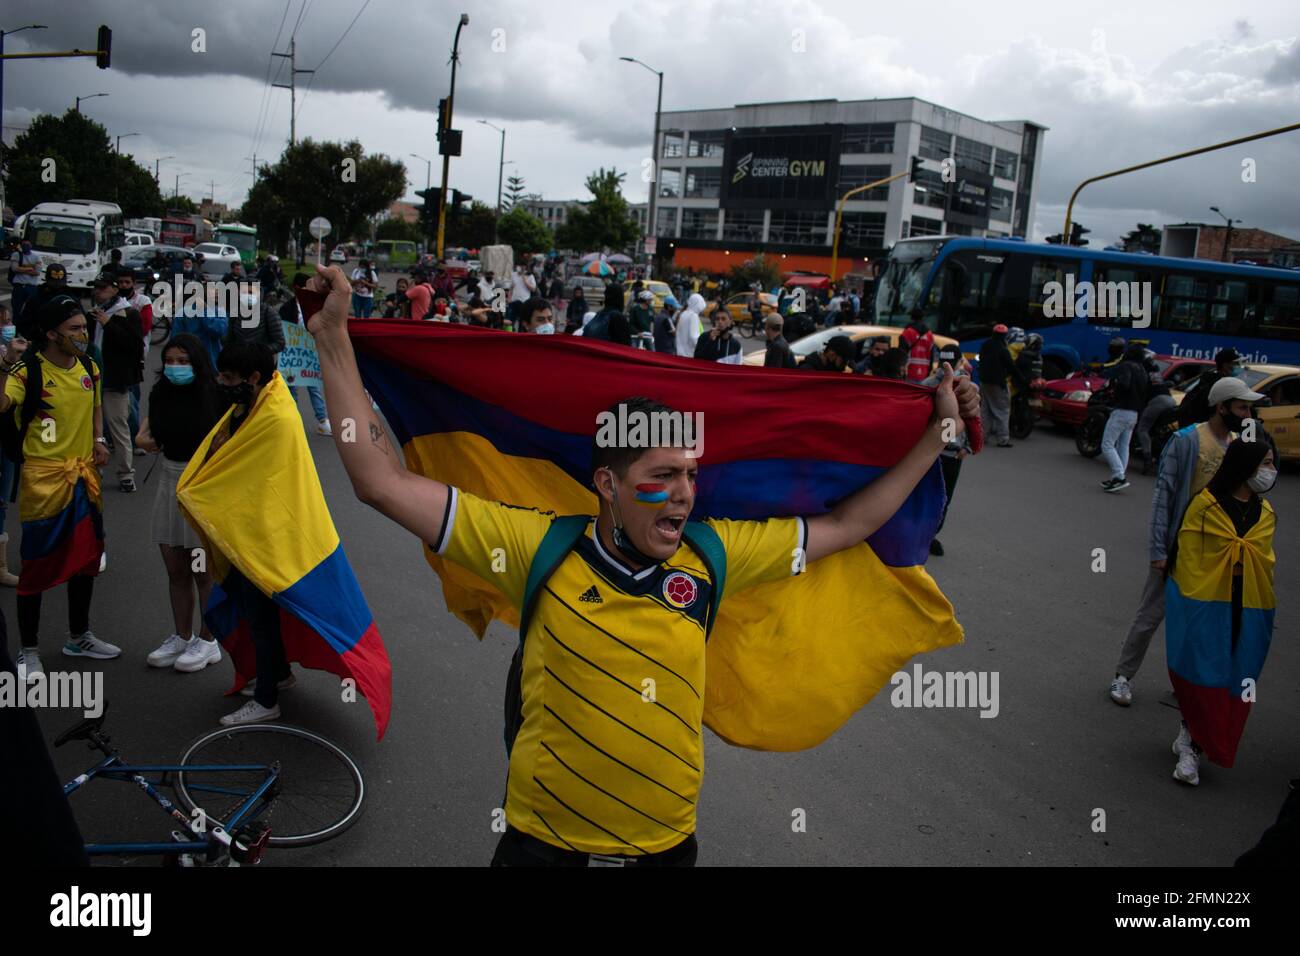 Bogota, Colombia, May 10, 2021, Demonstrators with Colombian flags participate in a protest as Bogota faces its 13 day of anti-government protests against the Health Reform and Police Brutality cases that rise to over 30 dead across the country since the National Strike begun. In Bogota, Colombia on May 10, 2021 Stock Photo